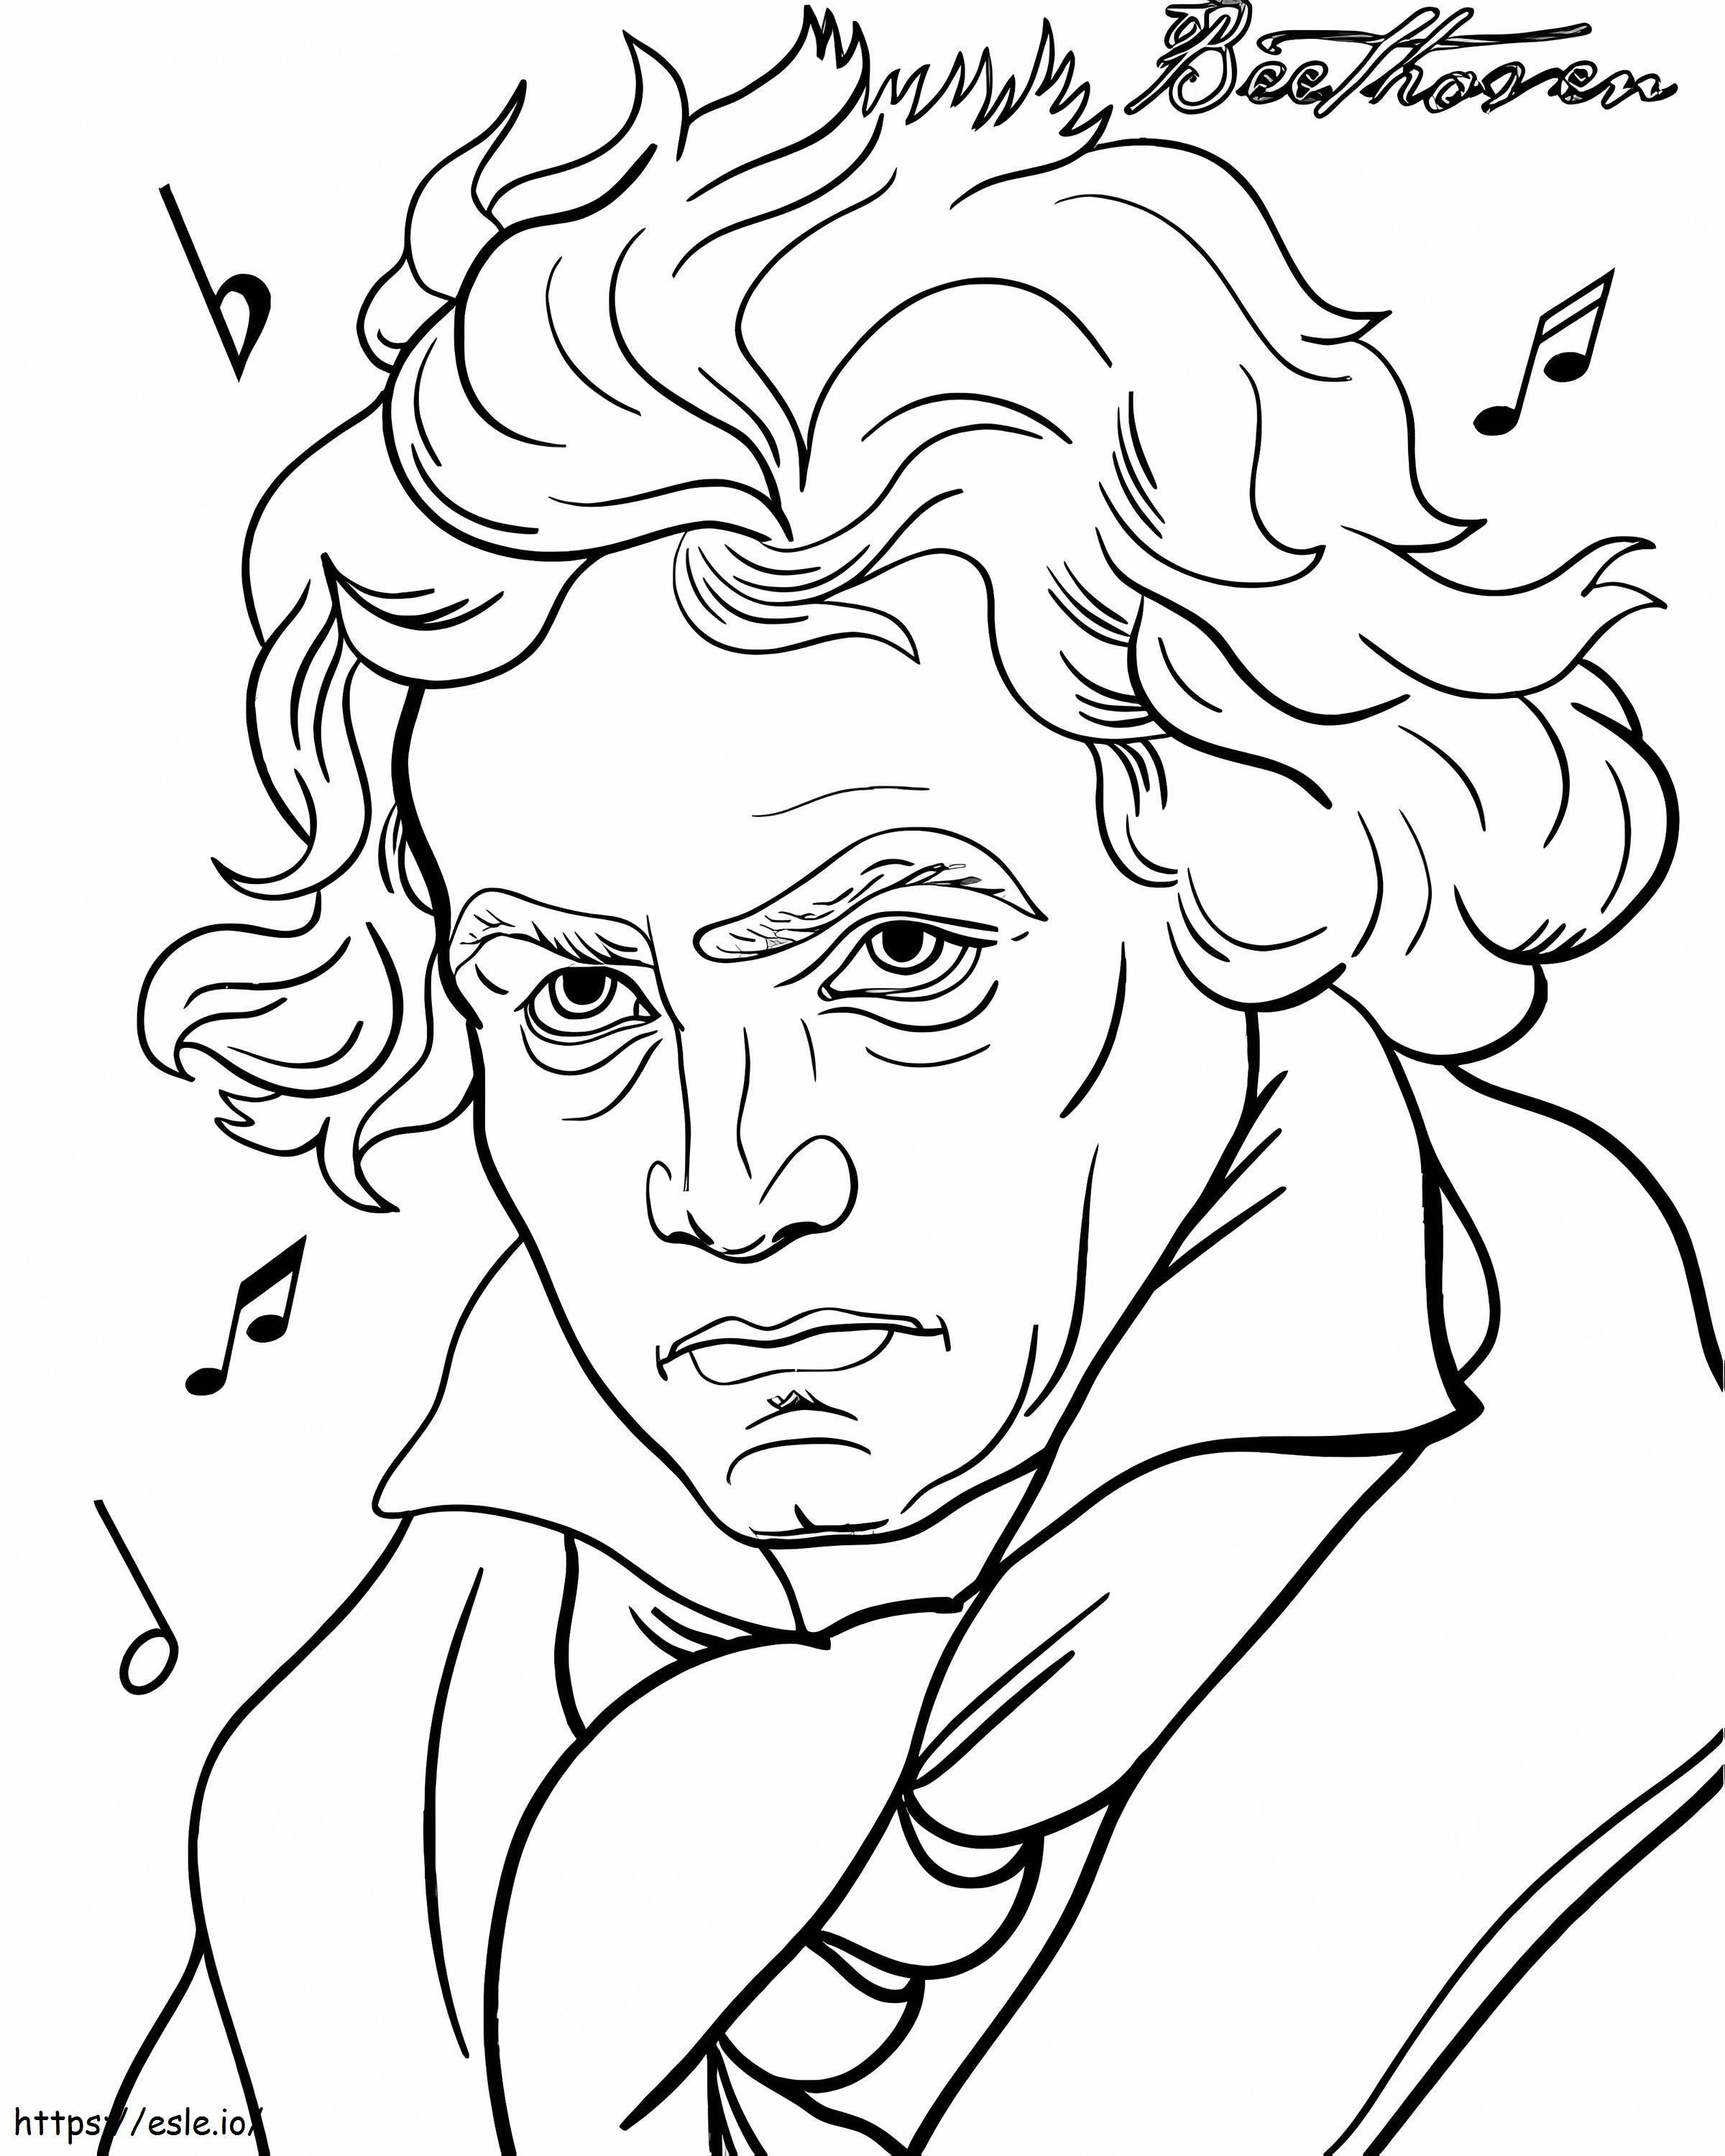 Beethoven coloring page